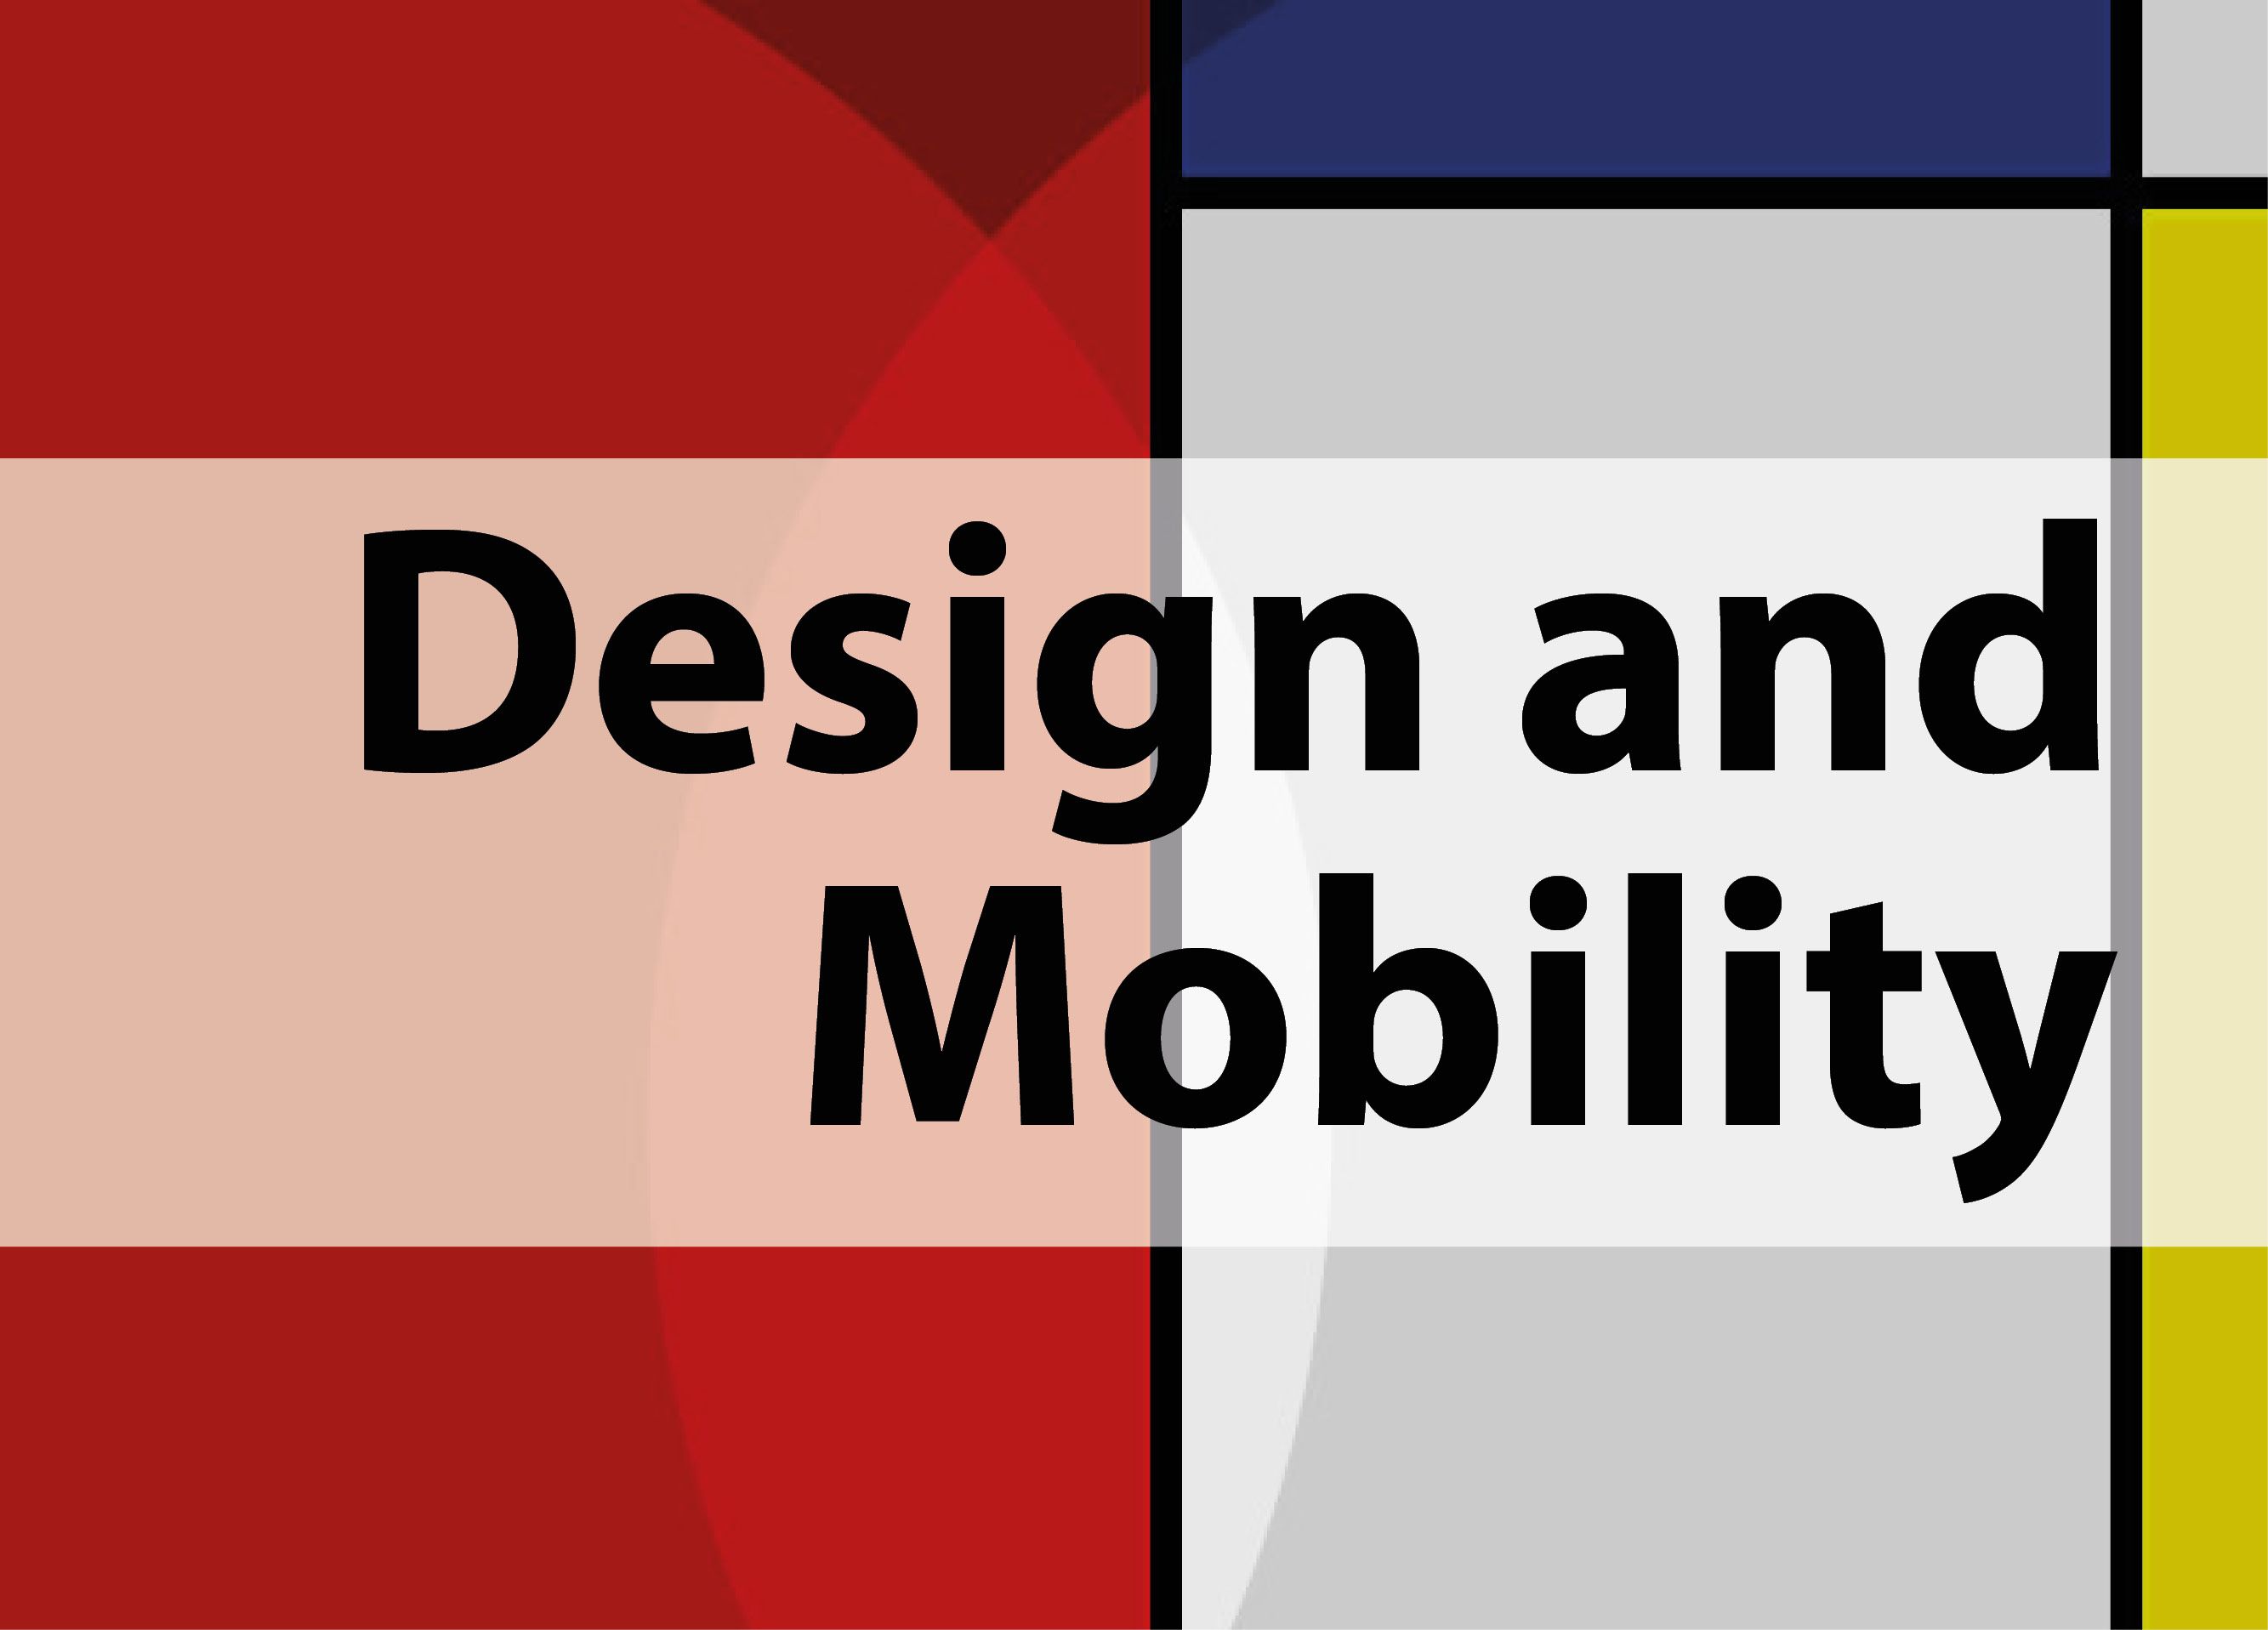 Design and Mobility